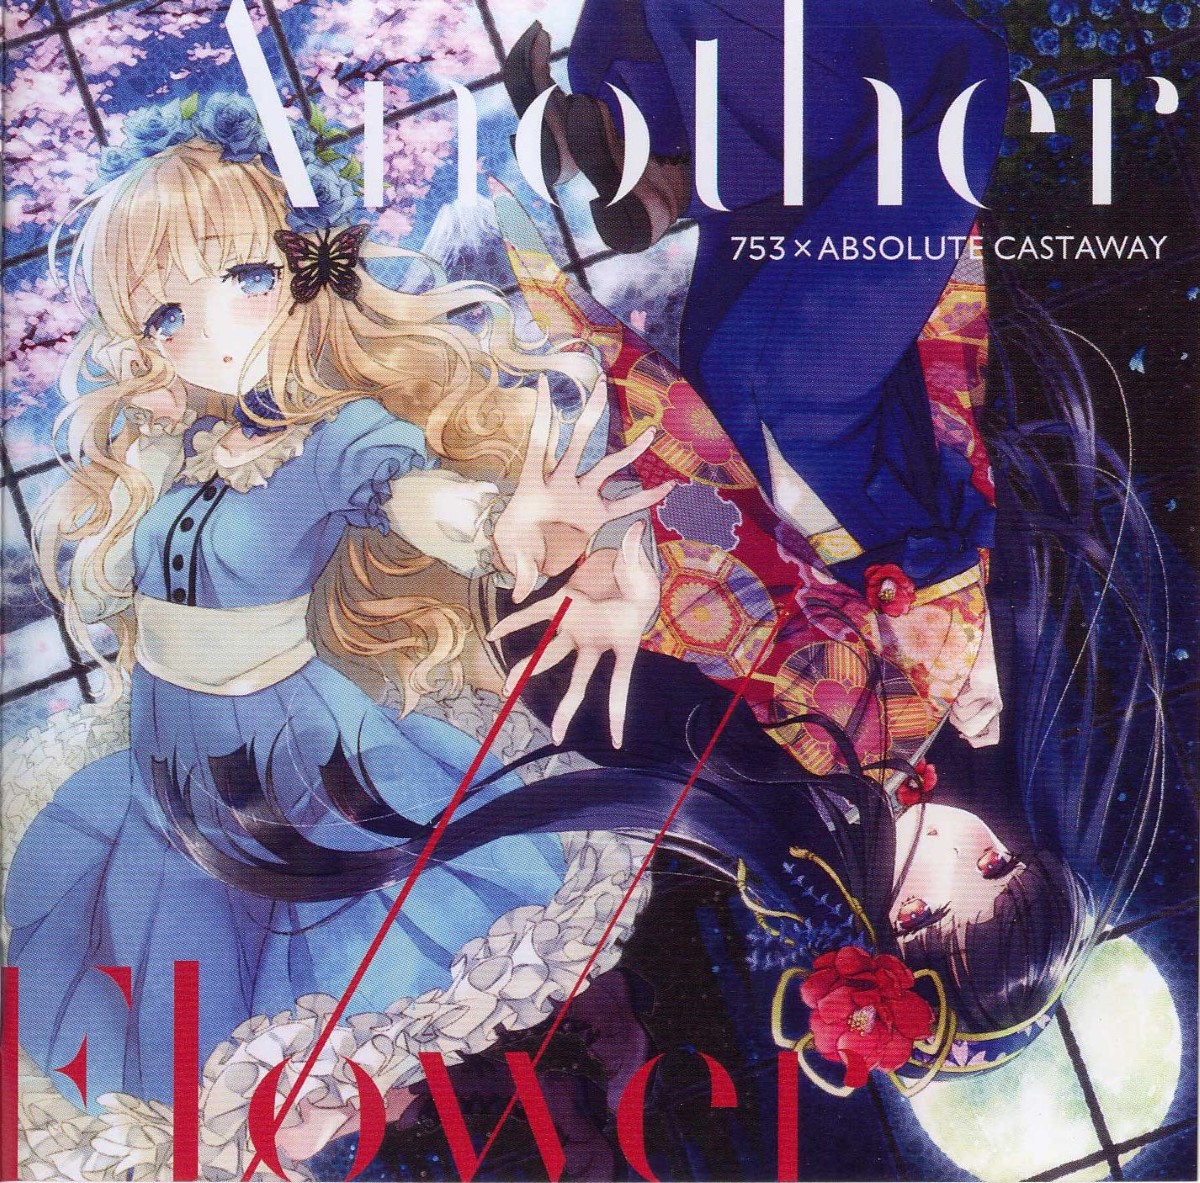 (M3-35)(同人音楽)[しちごさん×ABSOLUTE CASTAWAY]Another Flower II(FLAC+CUE+BK)